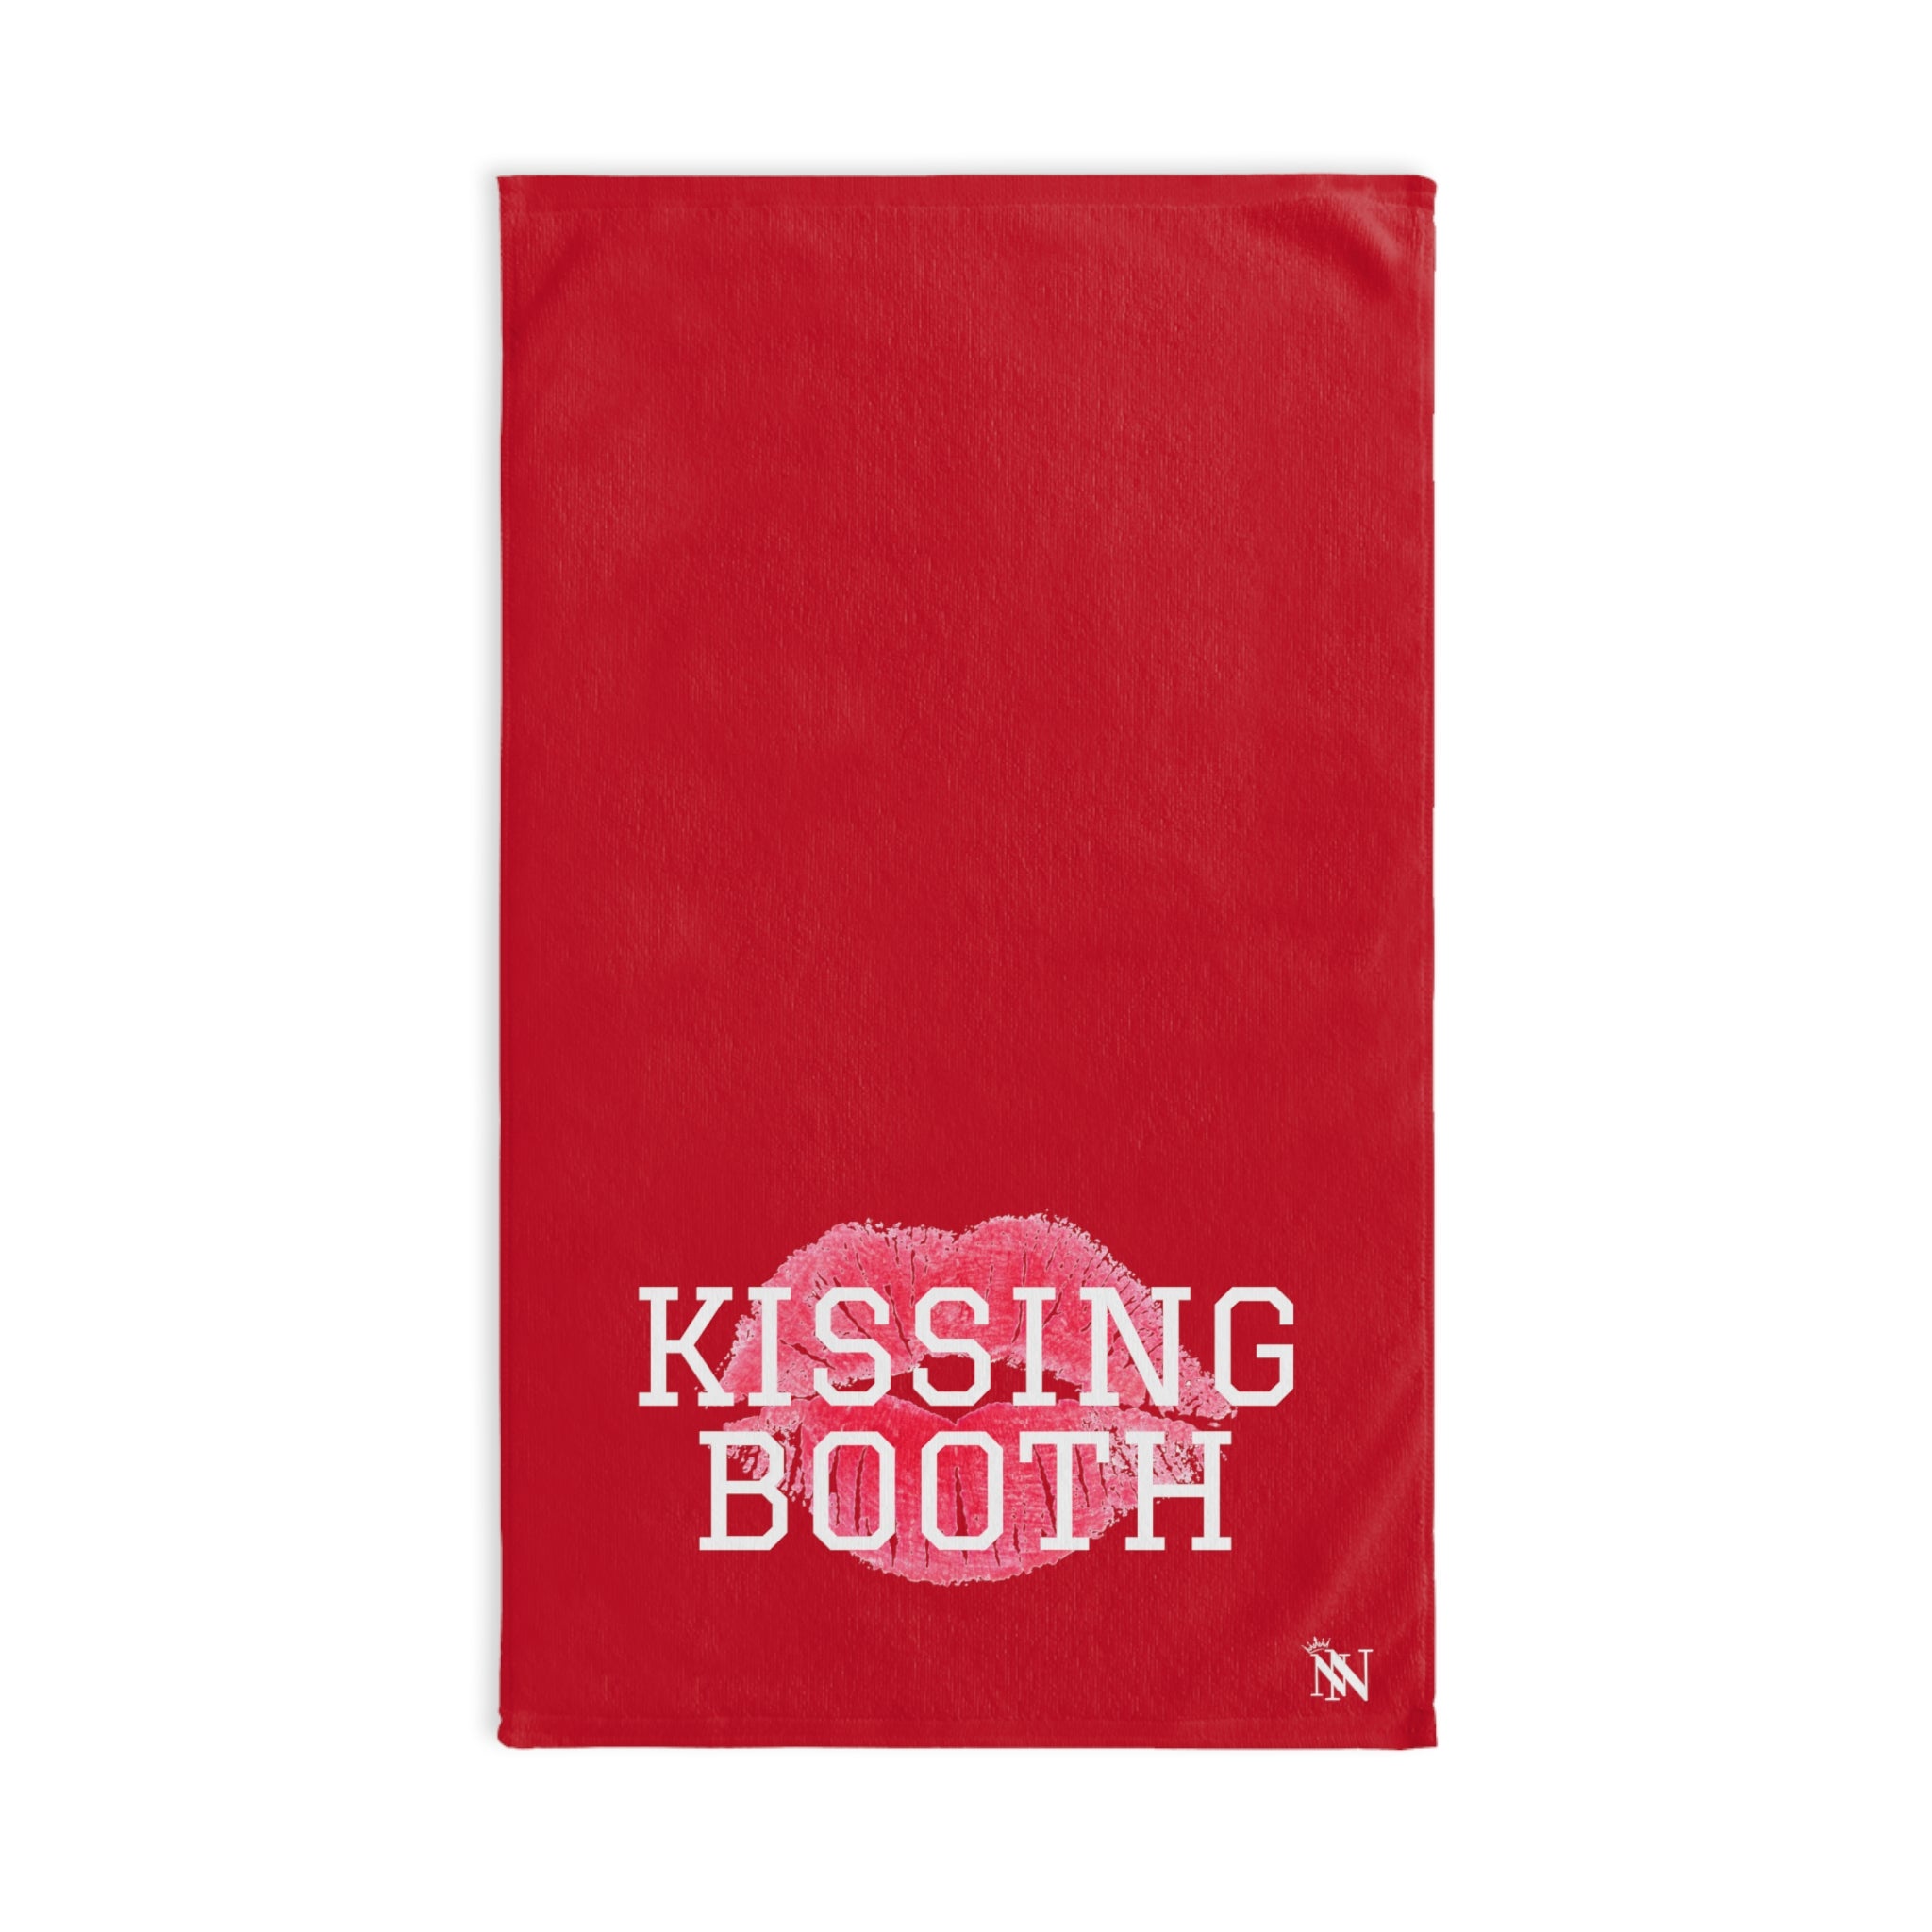 Kissing Booth Lips Red | Sexy Gifts for Boyfriend, Funny Towel Romantic Gift for Wedding Couple Fiance First Year 2nd Anniversary Valentines, Party Gag Gifts, Joke Humor Cloth for Husband Men BF NECTAR NAPKINS